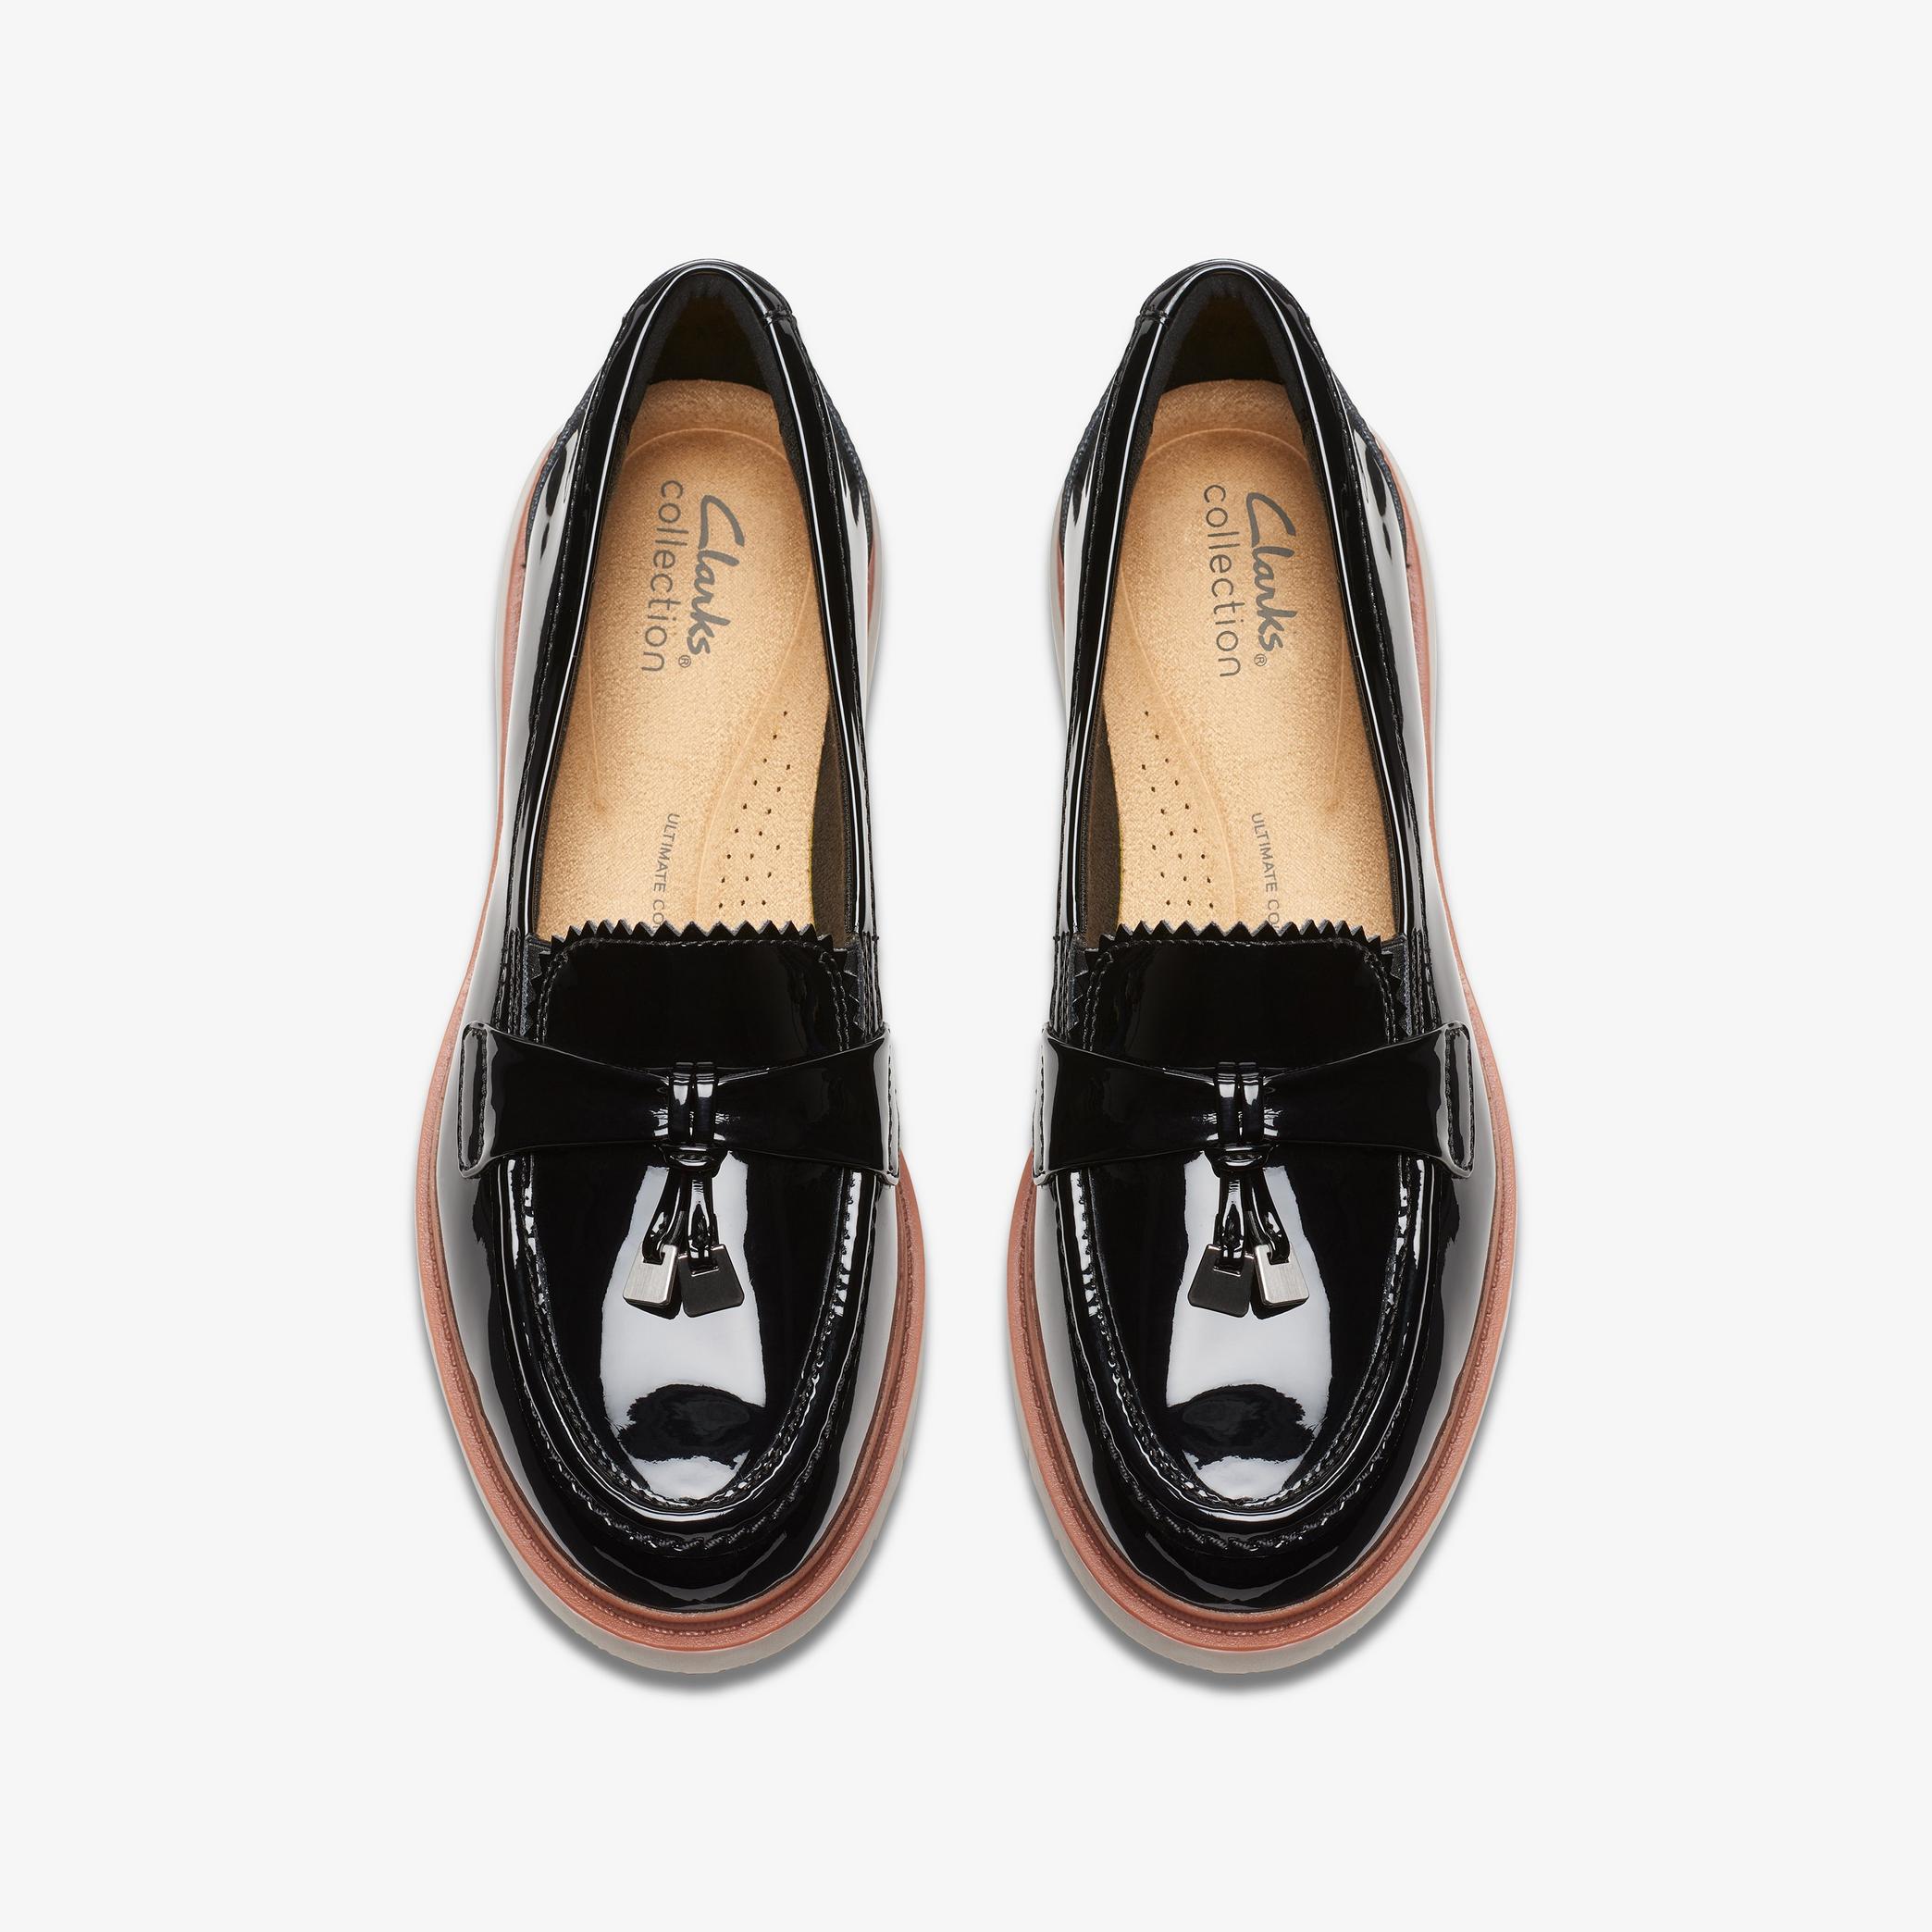 Westlynn Bella Black Patent Loafers, view 6 of 6